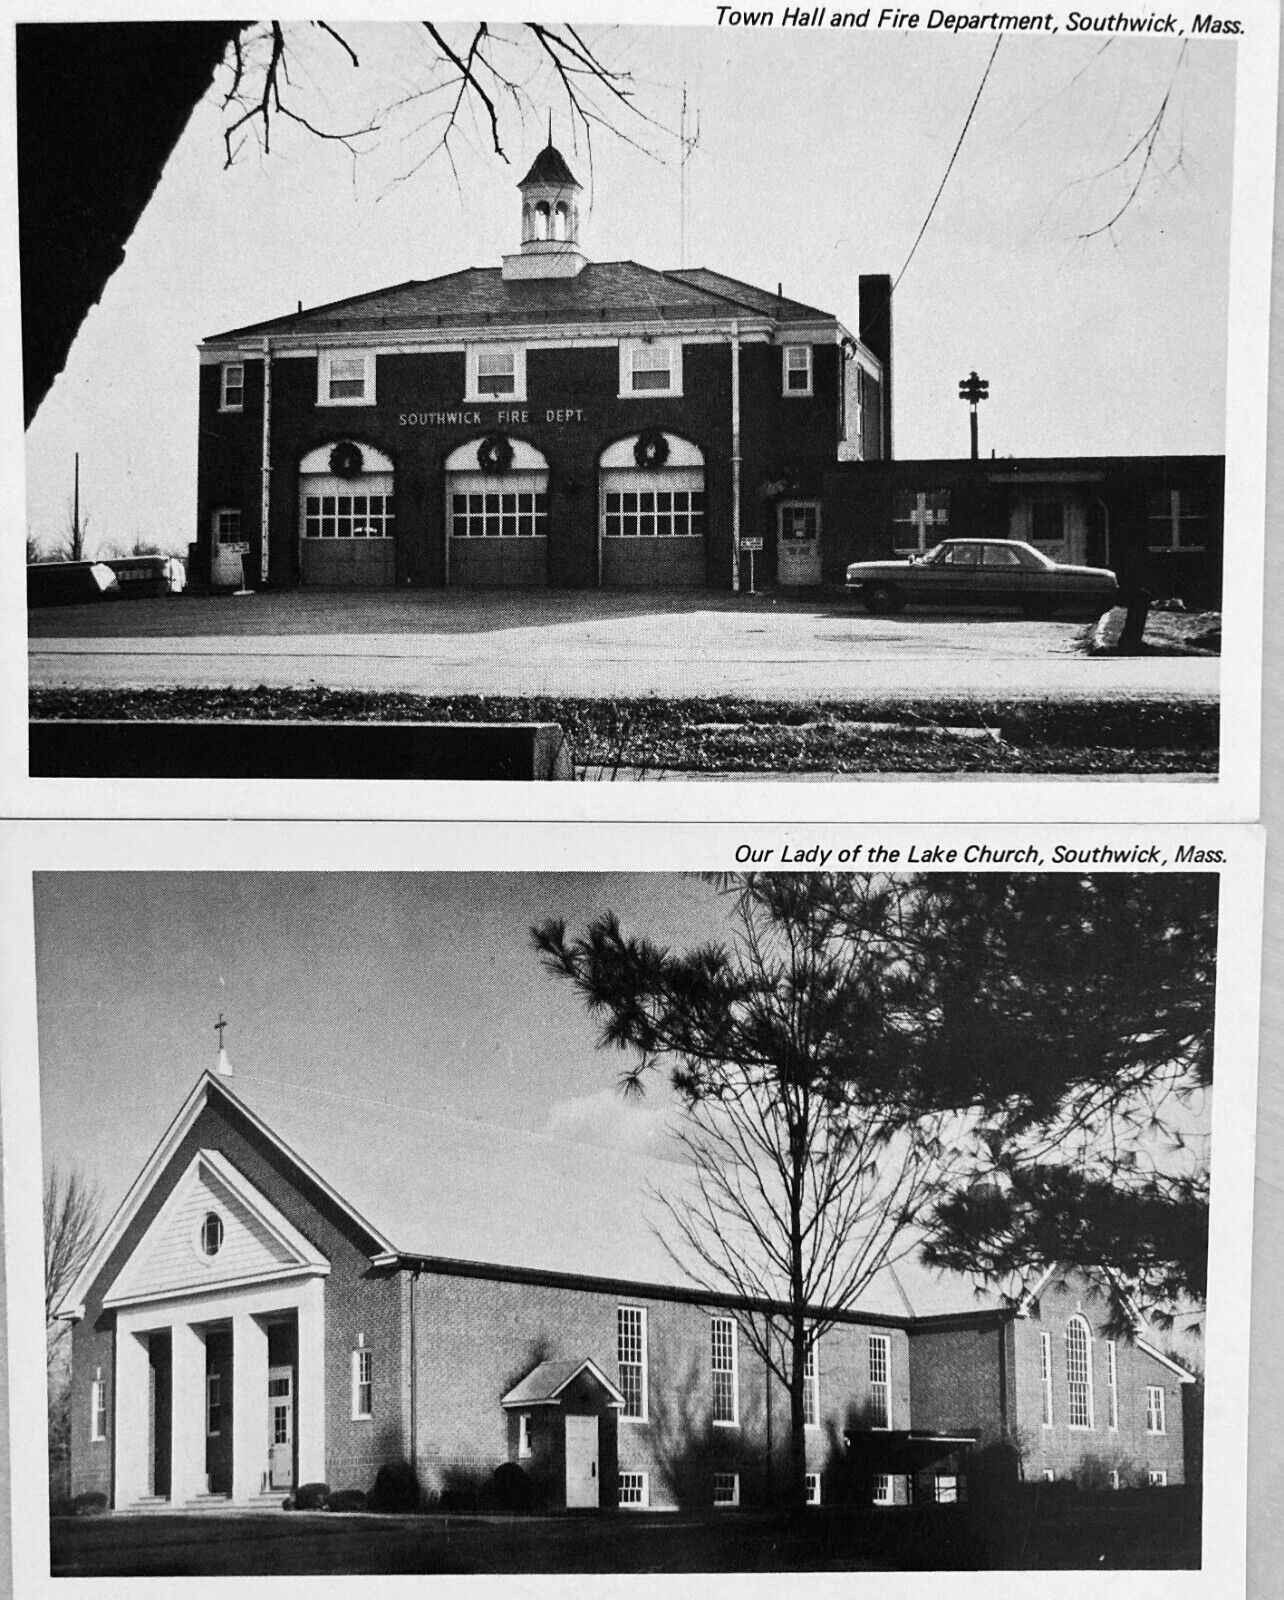 Lot of 2 Vintage Postcards Southwick MA Fire Department Town Hall Church